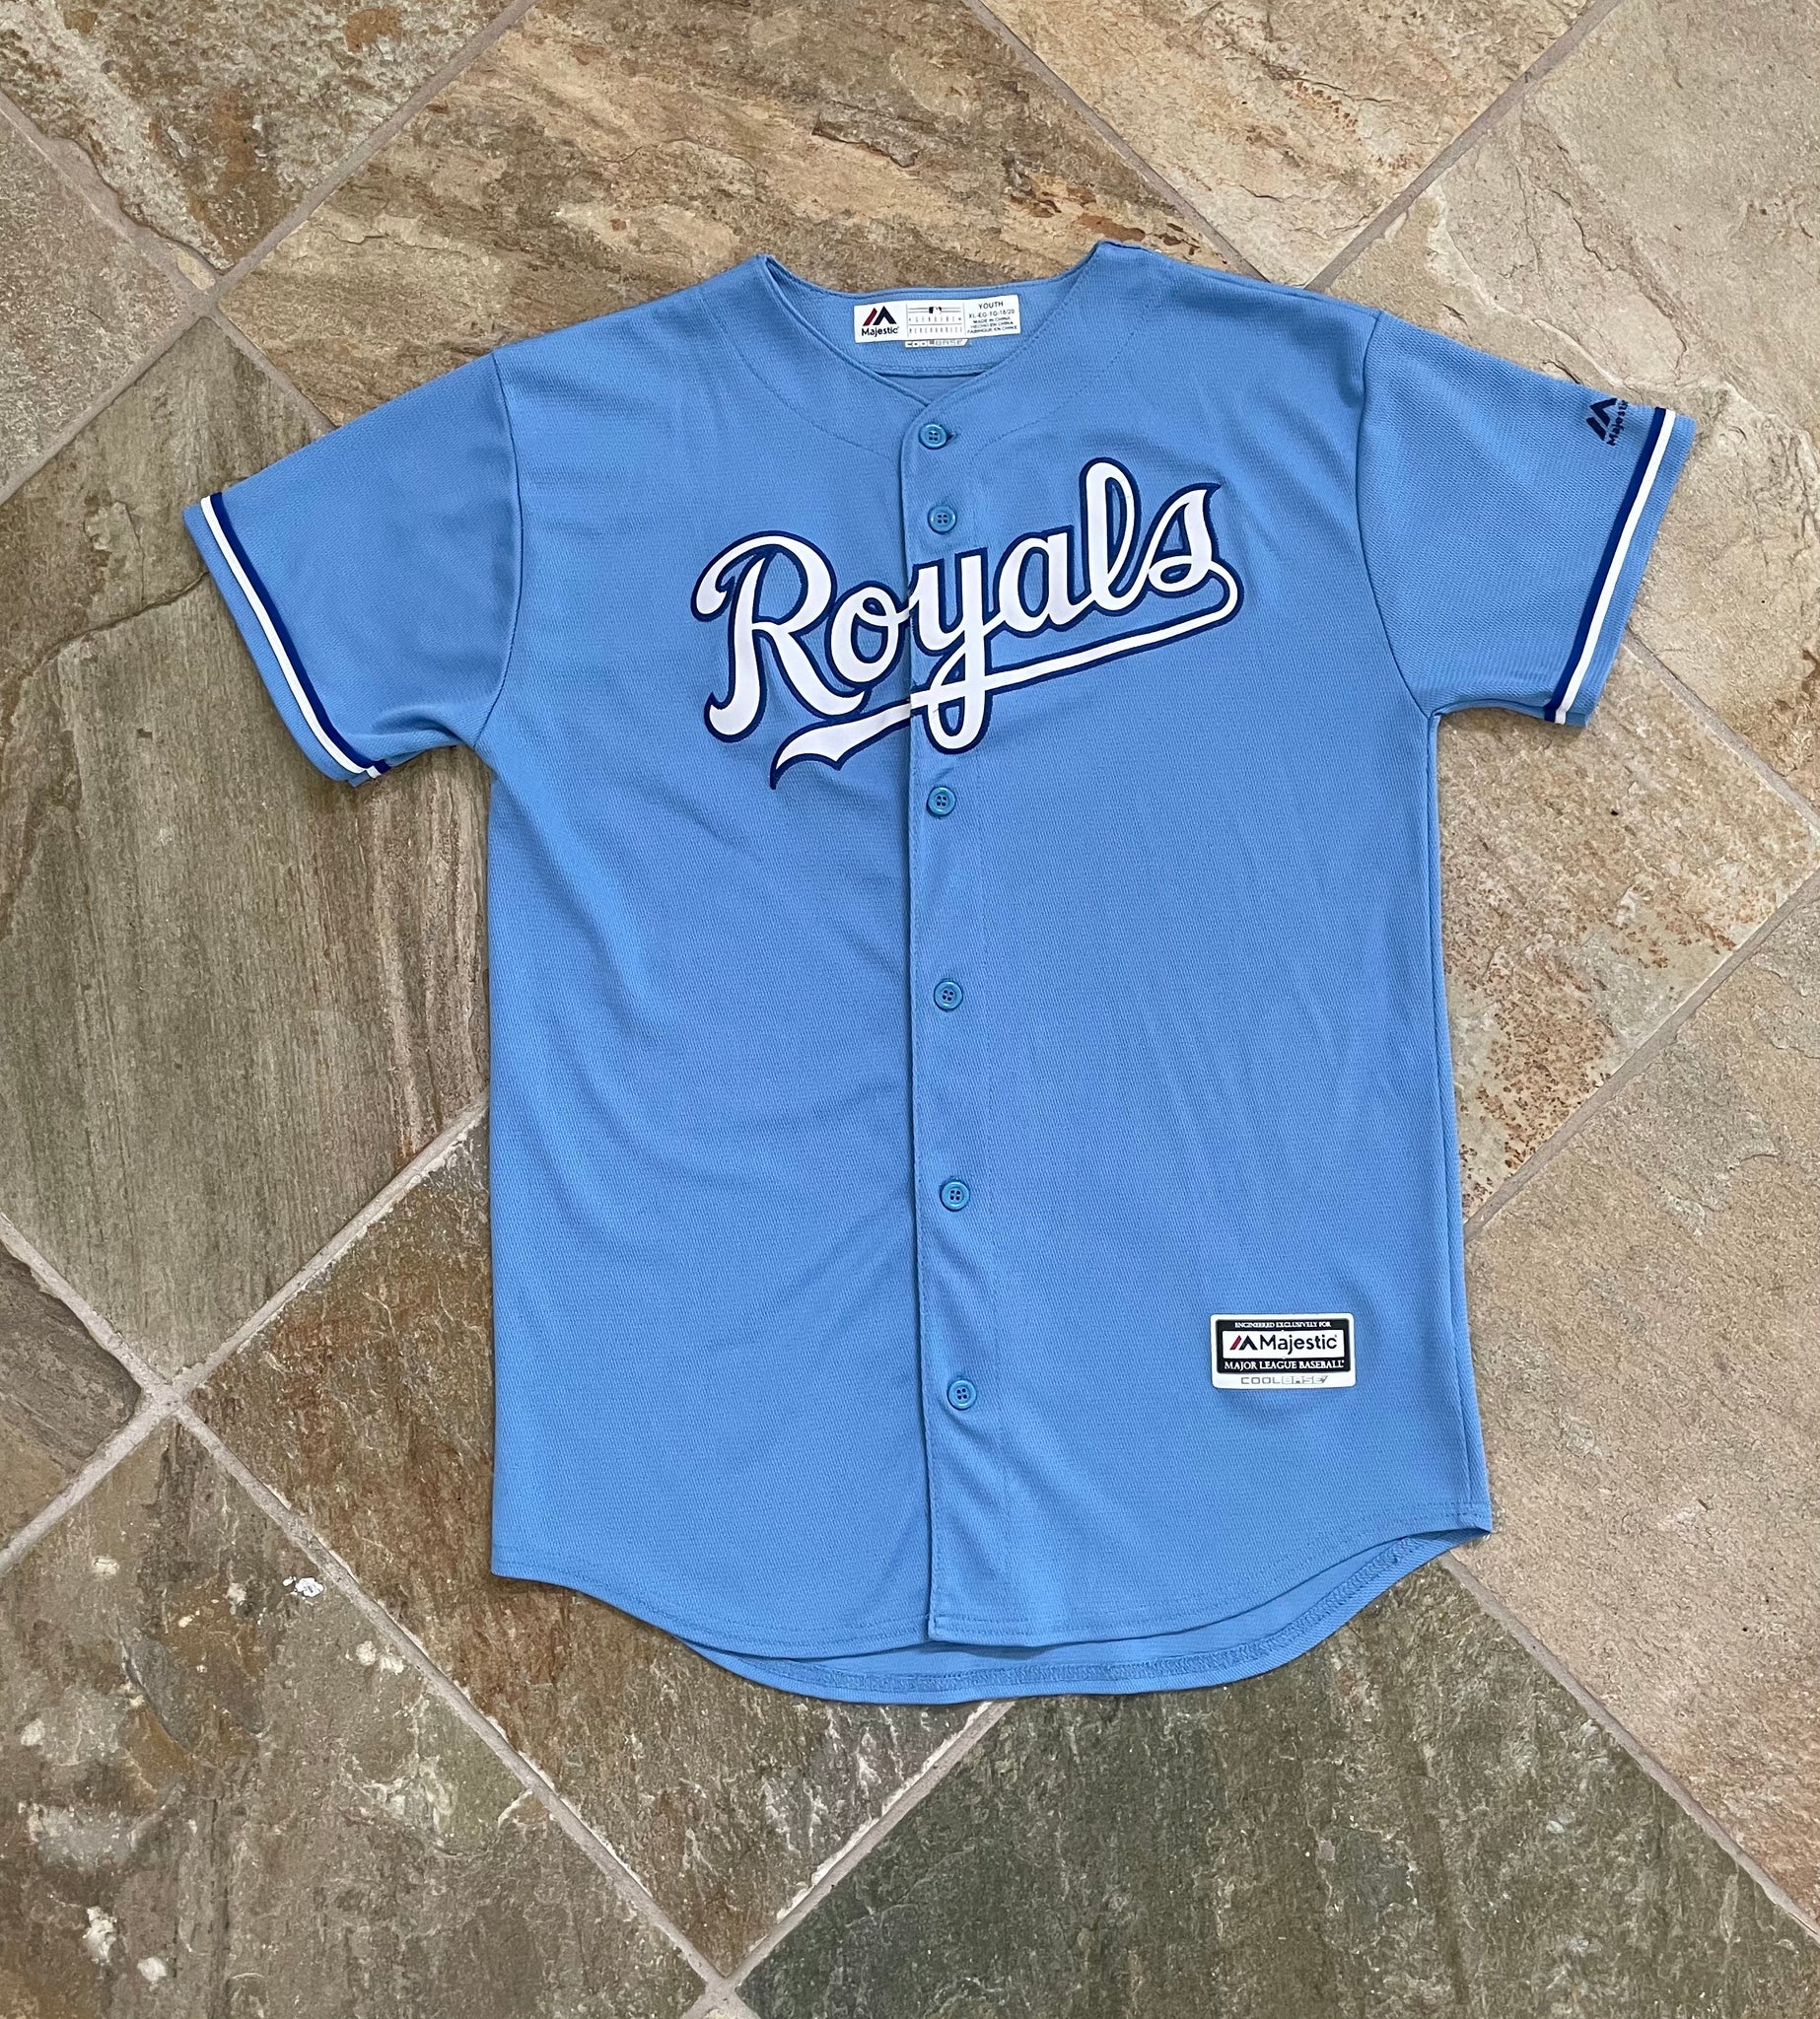  MLB Boys' Kansas City Royals Button Down Jersey with